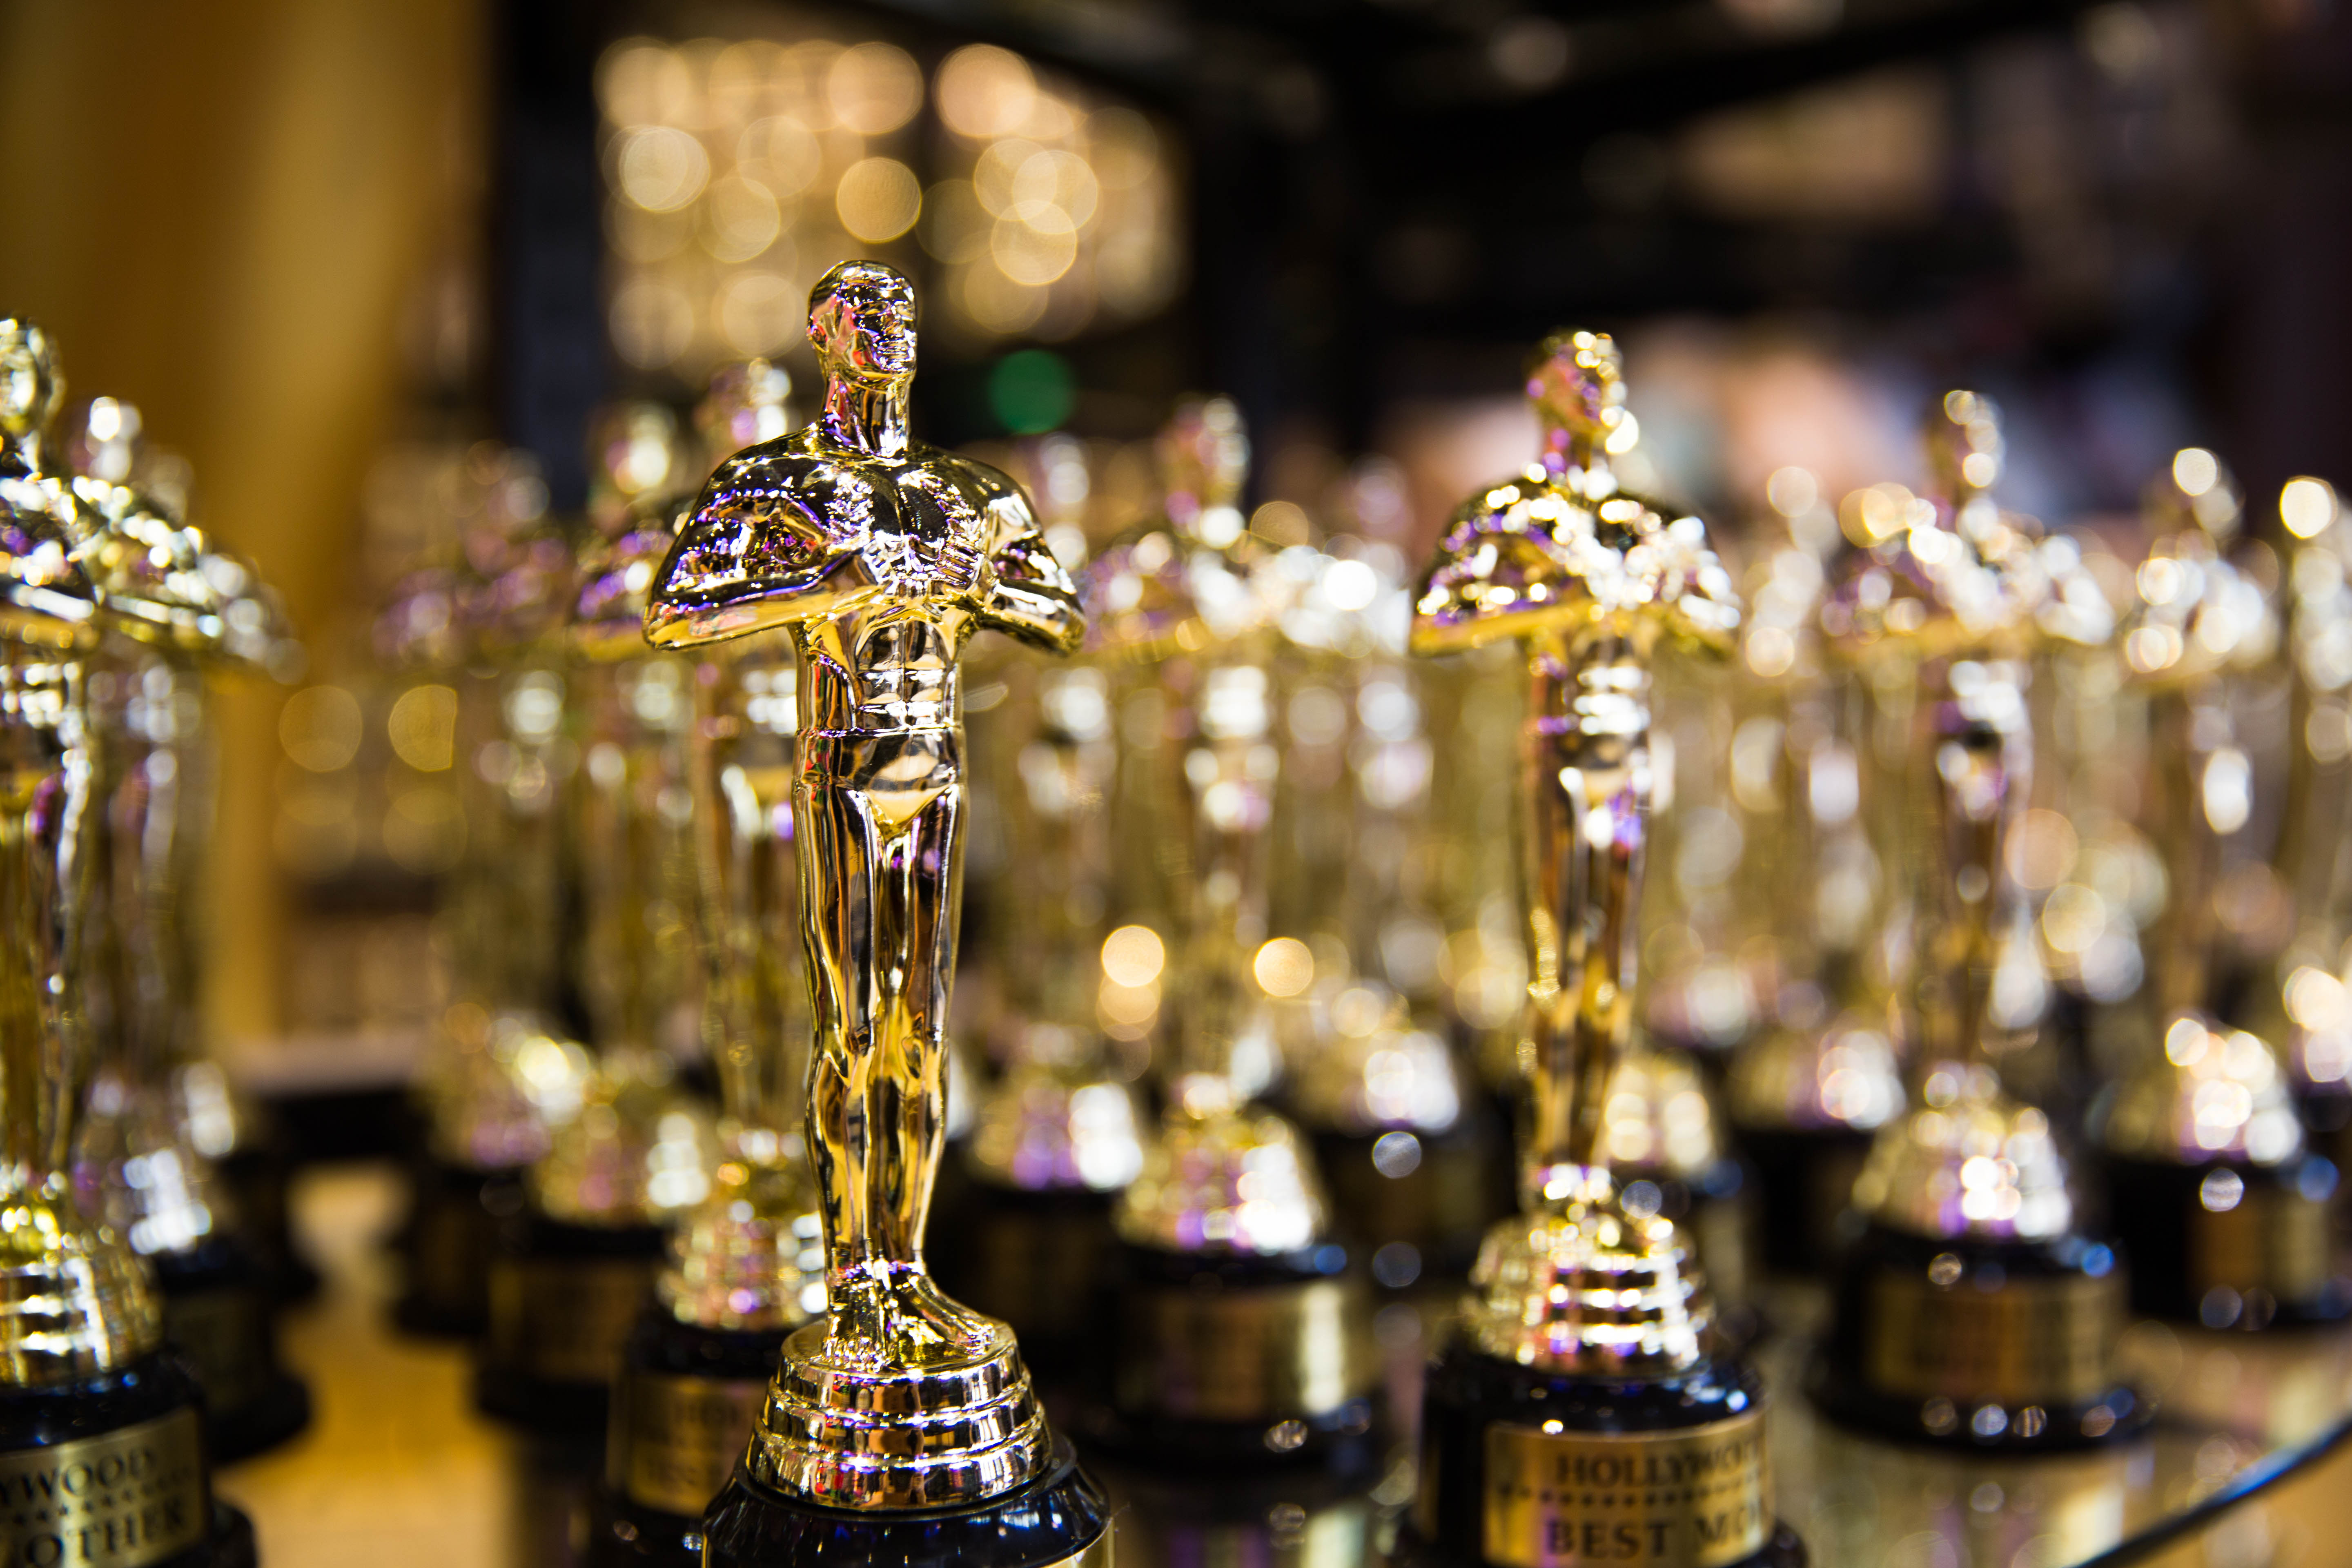 Multiple rows of golden Academy Awards trophies, shown close up